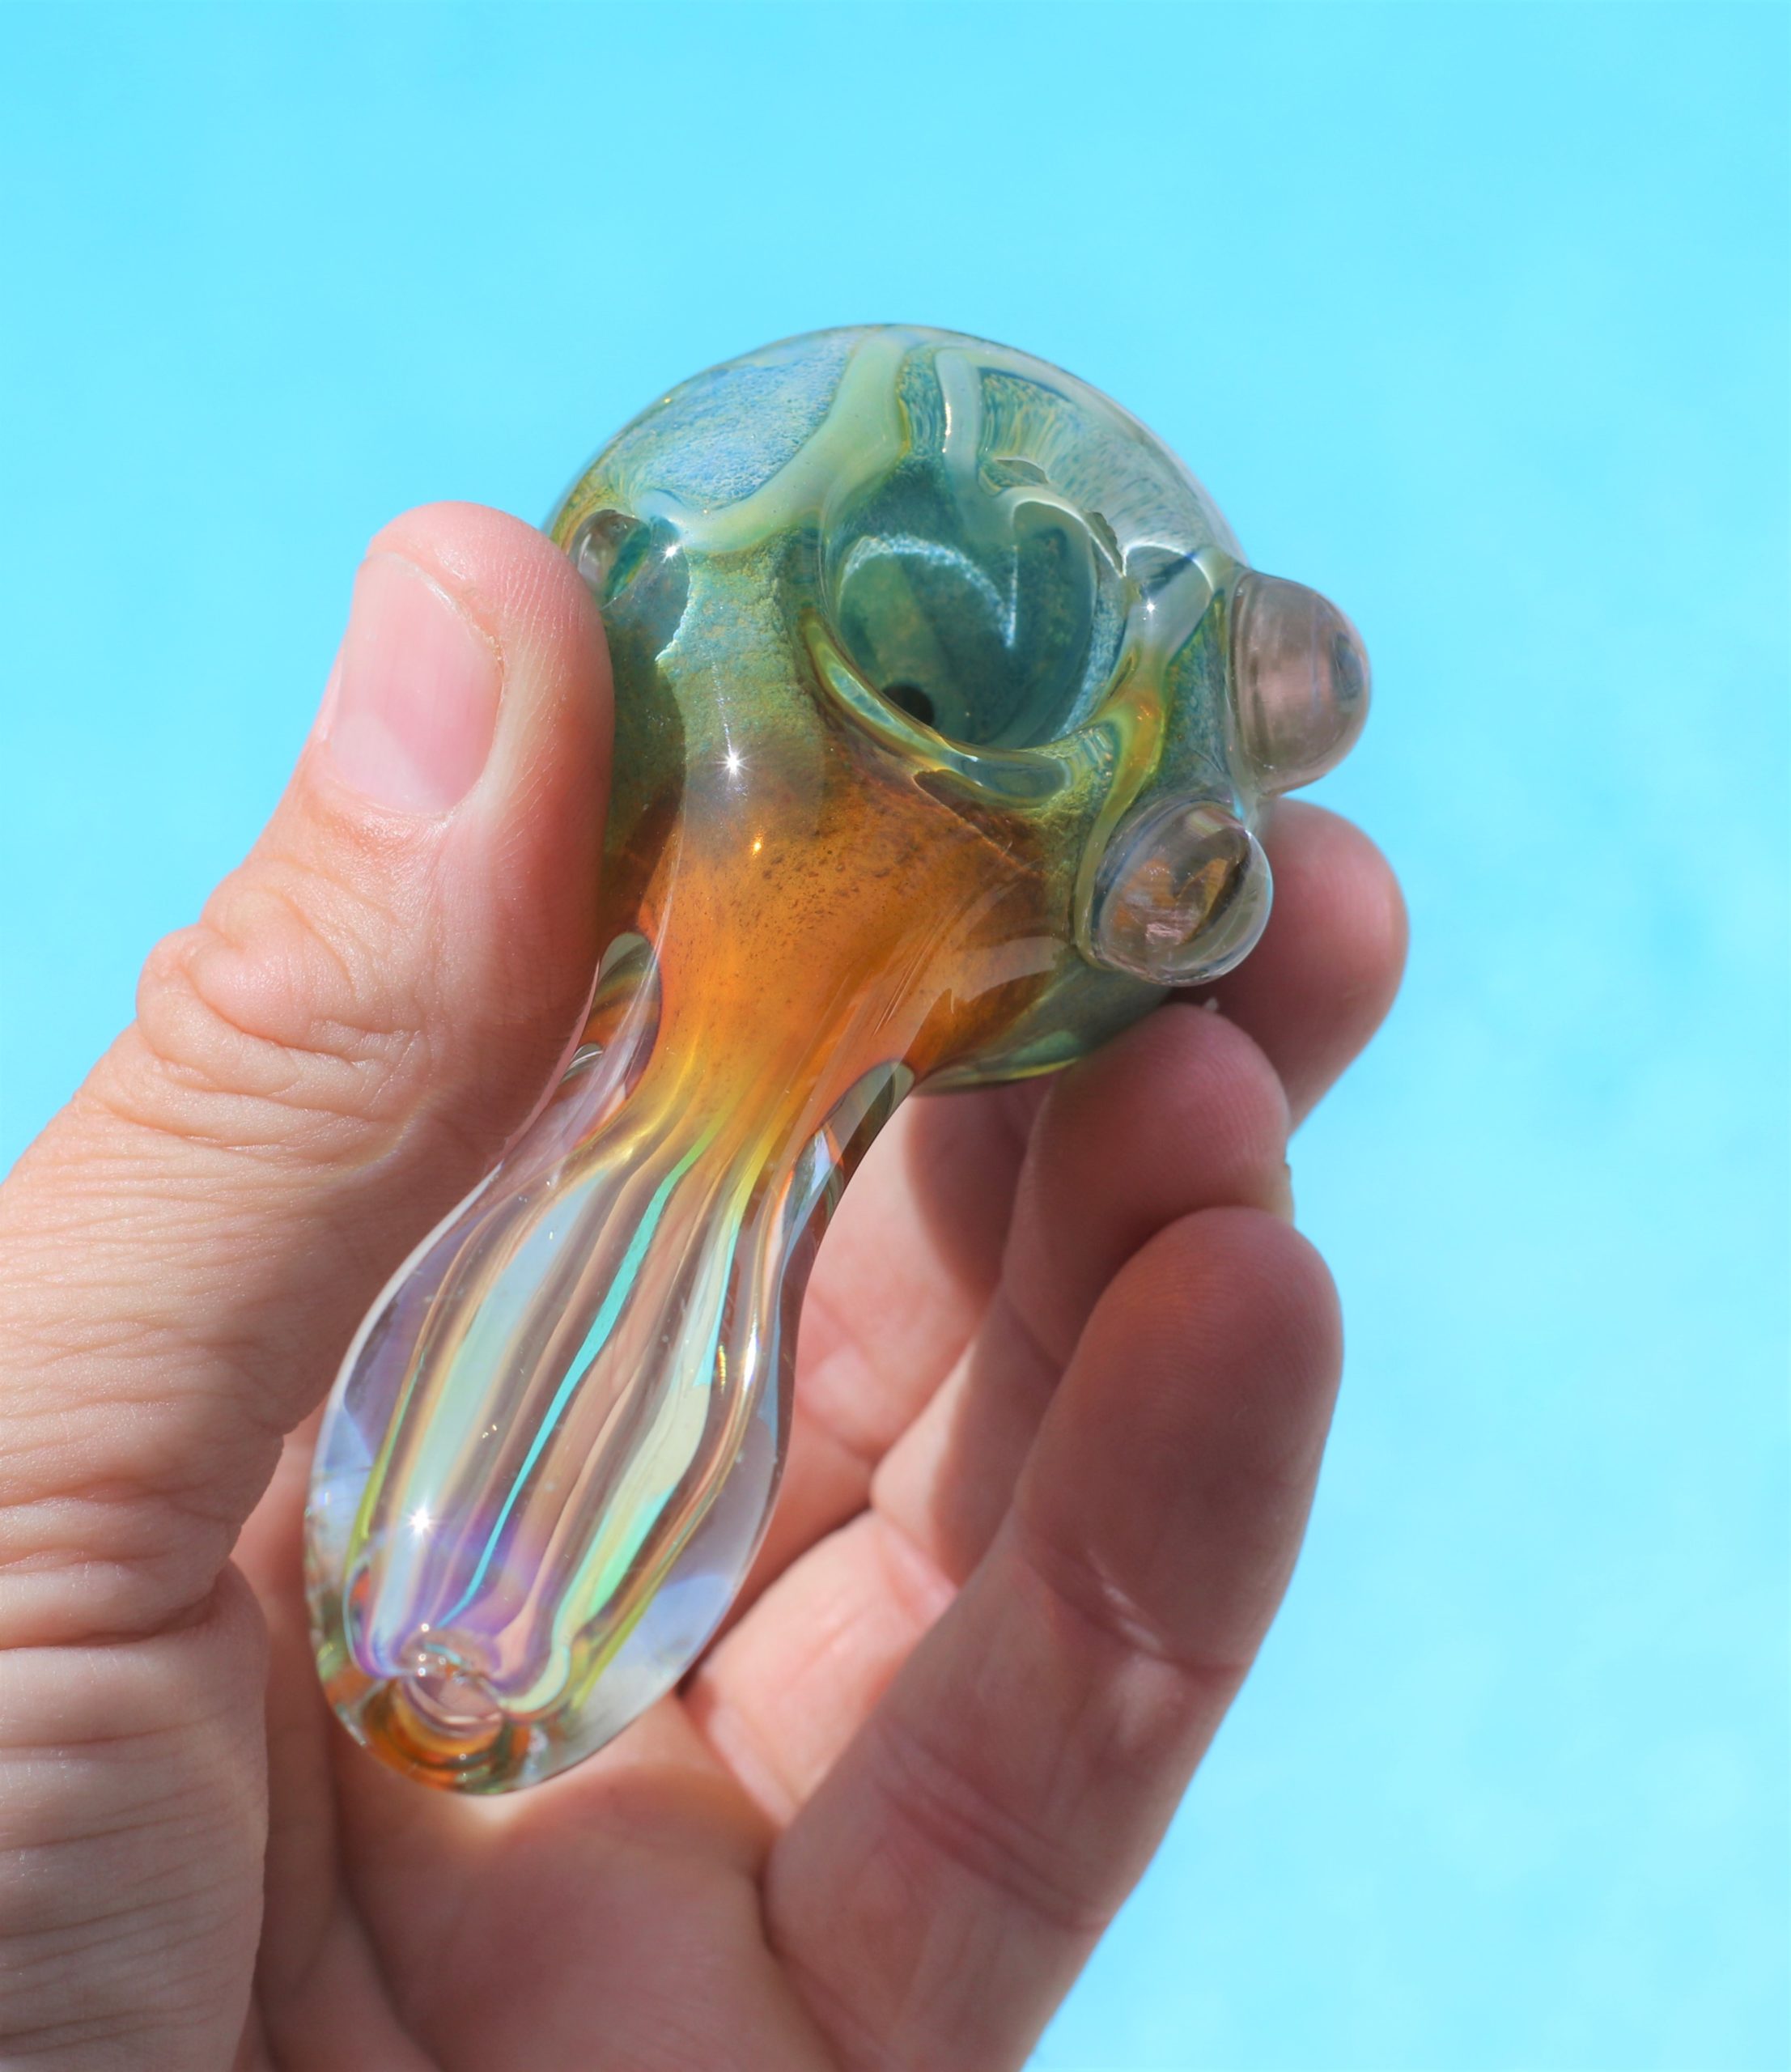 Details about   4.25 inch I Am The Best Glass Tobacco Smoking Spoon Pipe & Glass Screens 